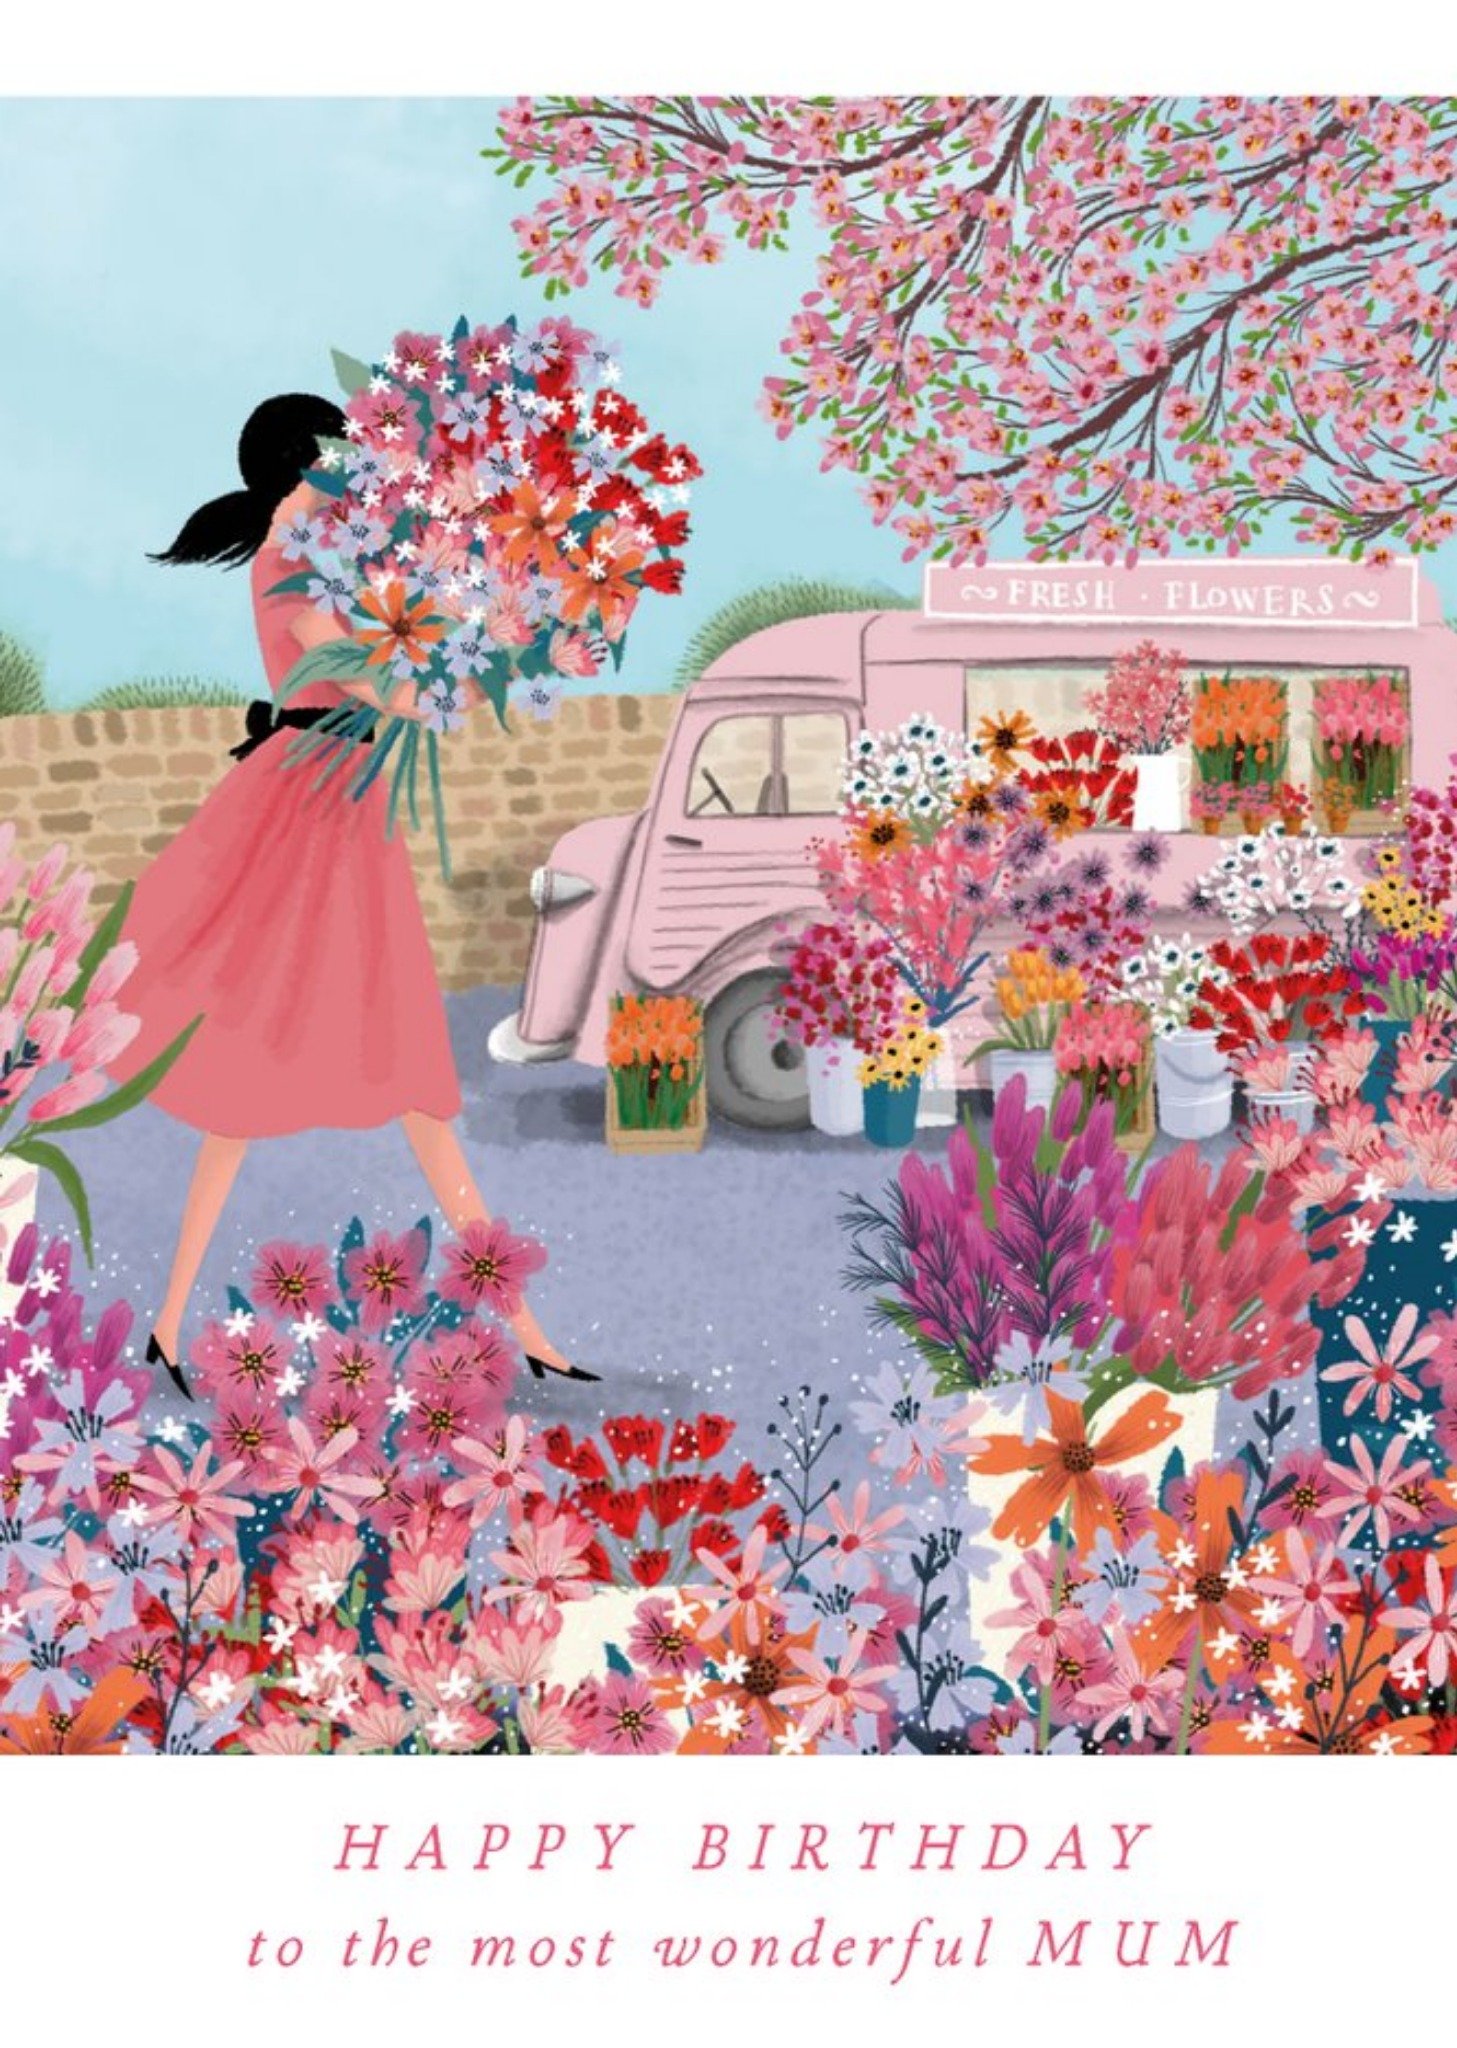 Moonpig Beautiful Illustration Of A Lady Buying A Bouquet Of Flowers Mum's Birthday Card, Large